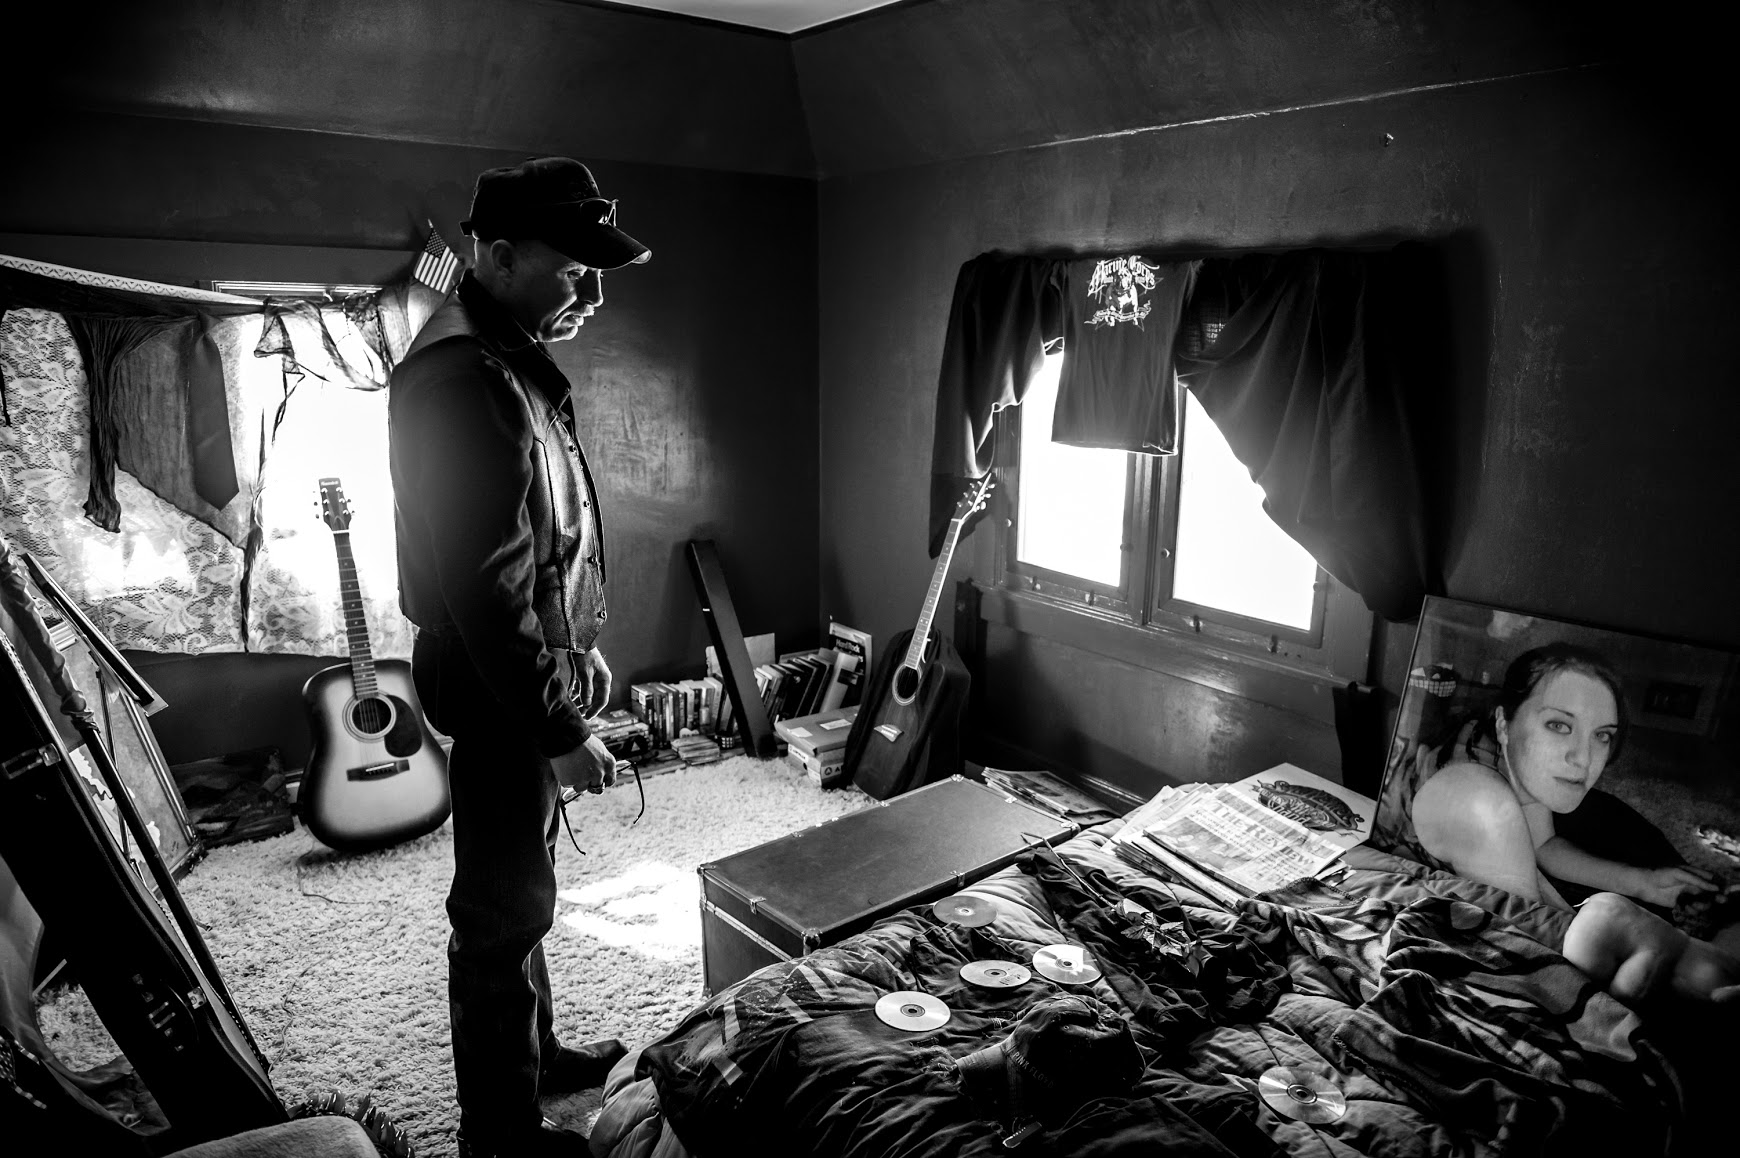 Gary Noling stands in his daughter Carrie's bedroom on the anniversary of her suicide in Alliance, Ohio. US Marine Carrie Goodwin suffered severe retaliation after reporting her rape to her commanders. Five days after she was went home with a bad conduct  discharge, she drank herself to death. "it destroyed my family. When Carrie died i lost all three of my kids and my grandkids. I lost two thirds of me. Two thirds of me is in that box of ashes."